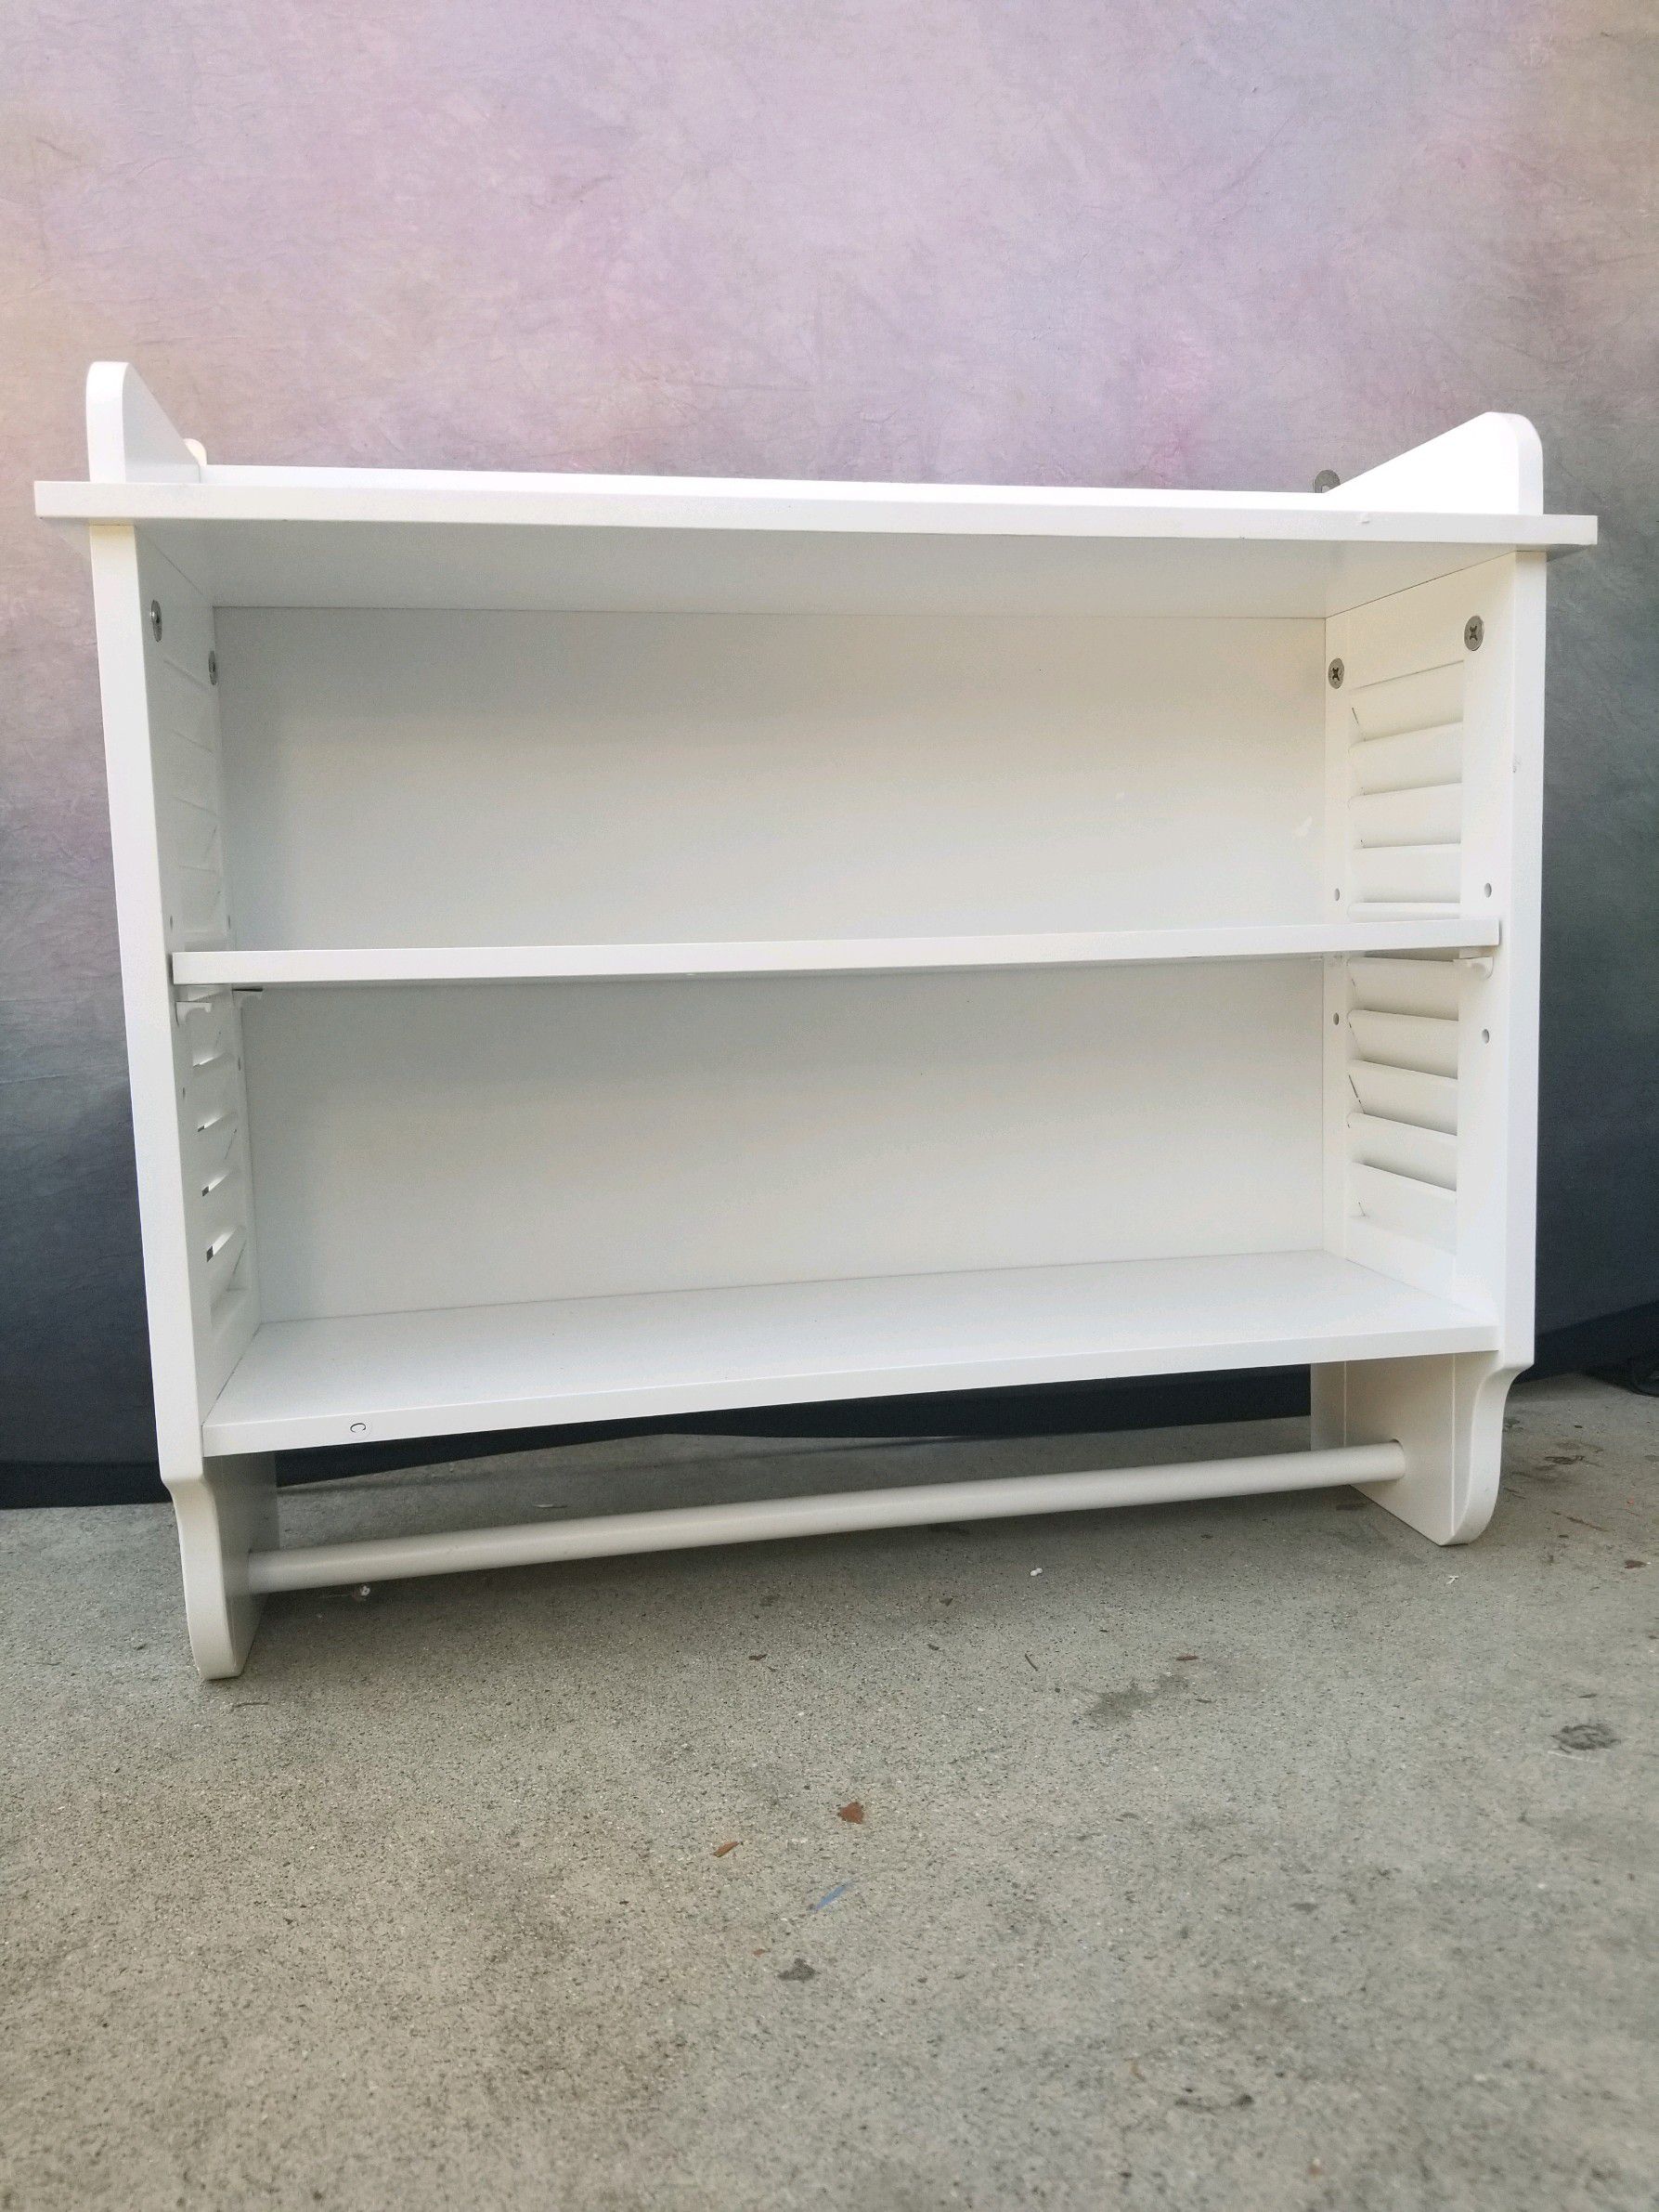 New bathroom wall shelve cabinet with towel bar , brand new